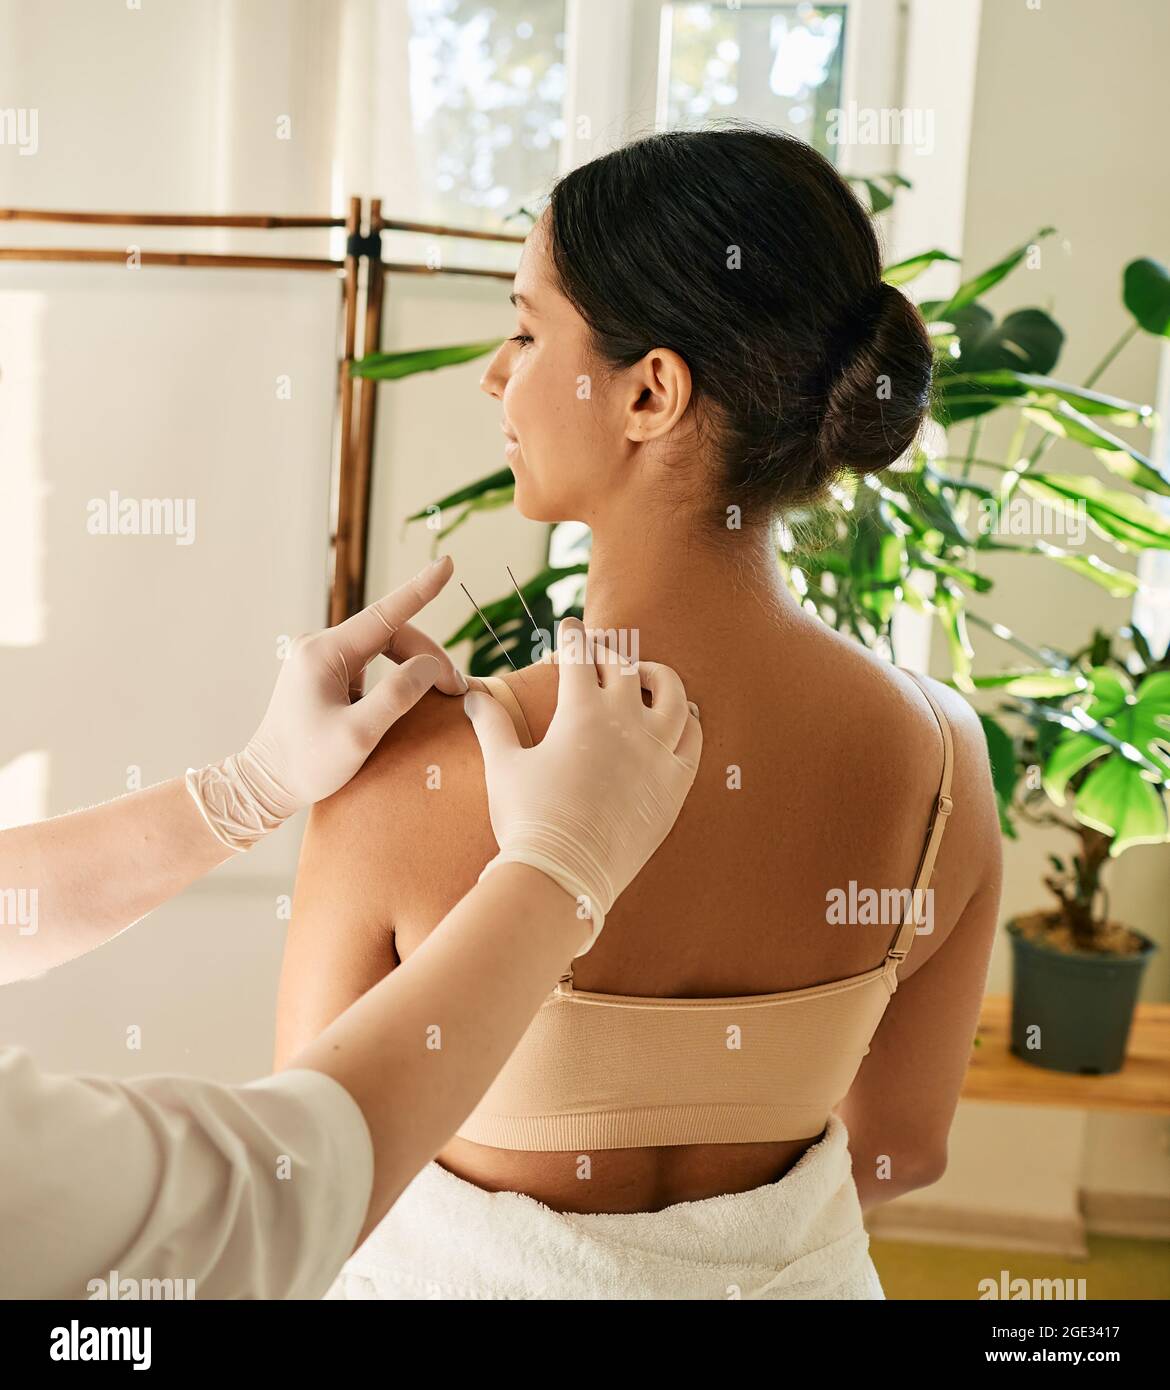 Adult woman relaxing and enjoying during acupuncture procedure. Shoulder acupressure, puncture of a meridian point on body patient Stock Photo